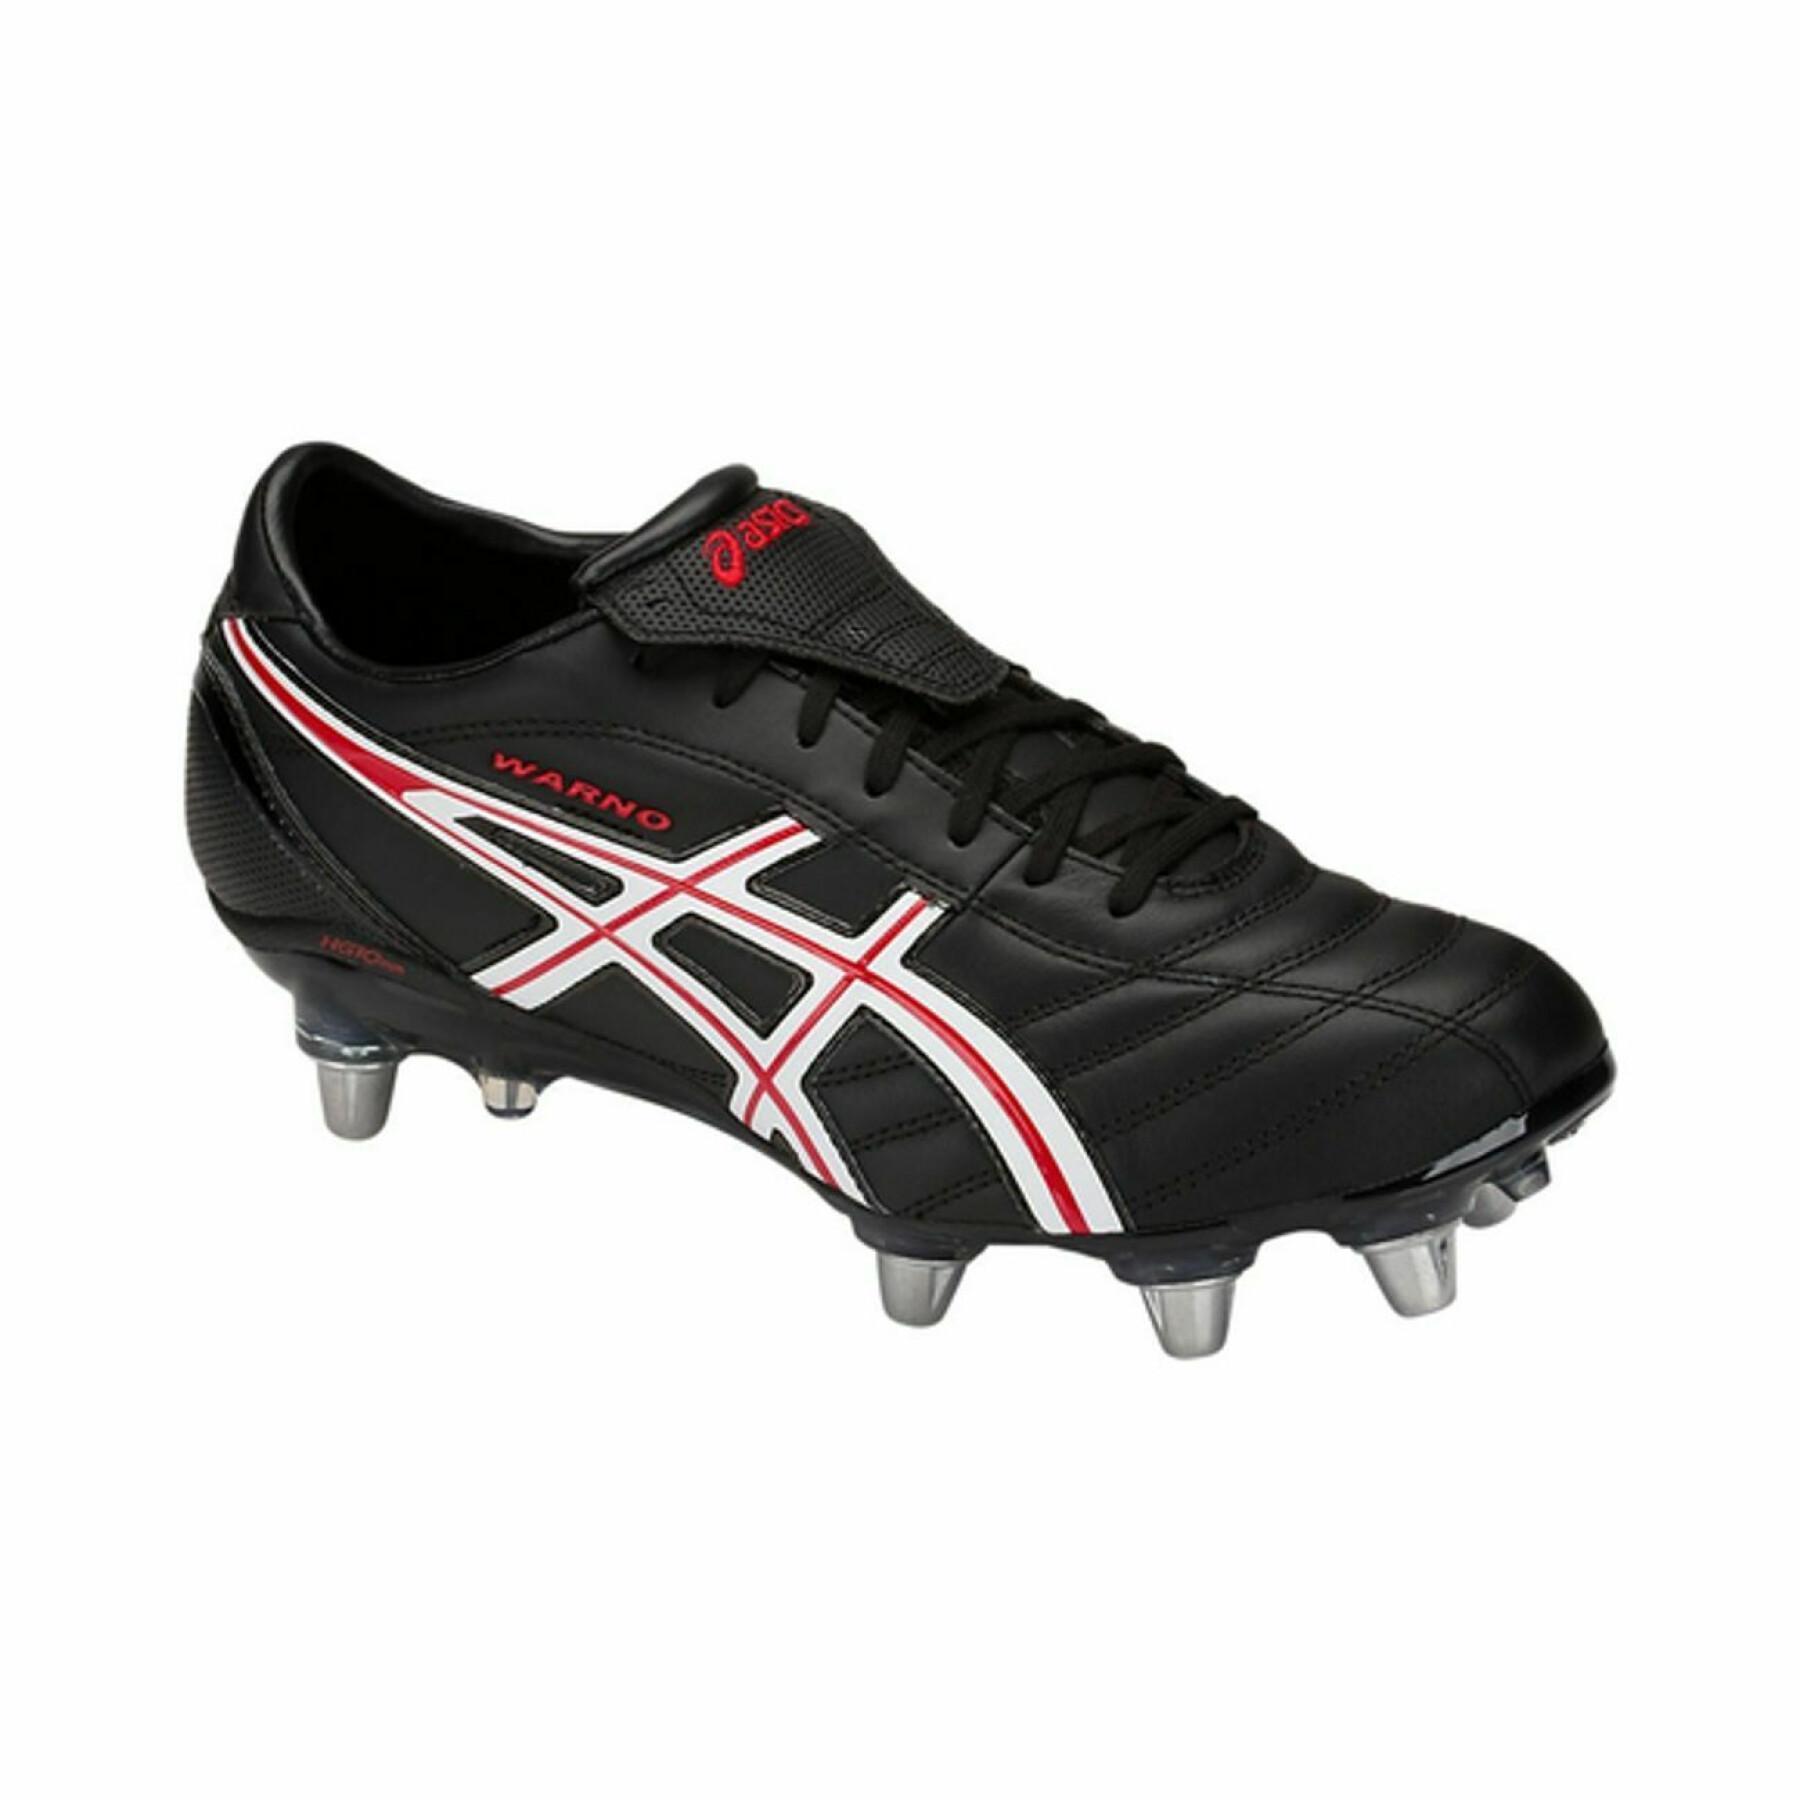 Rugby shoes Asics lethal warno st 2